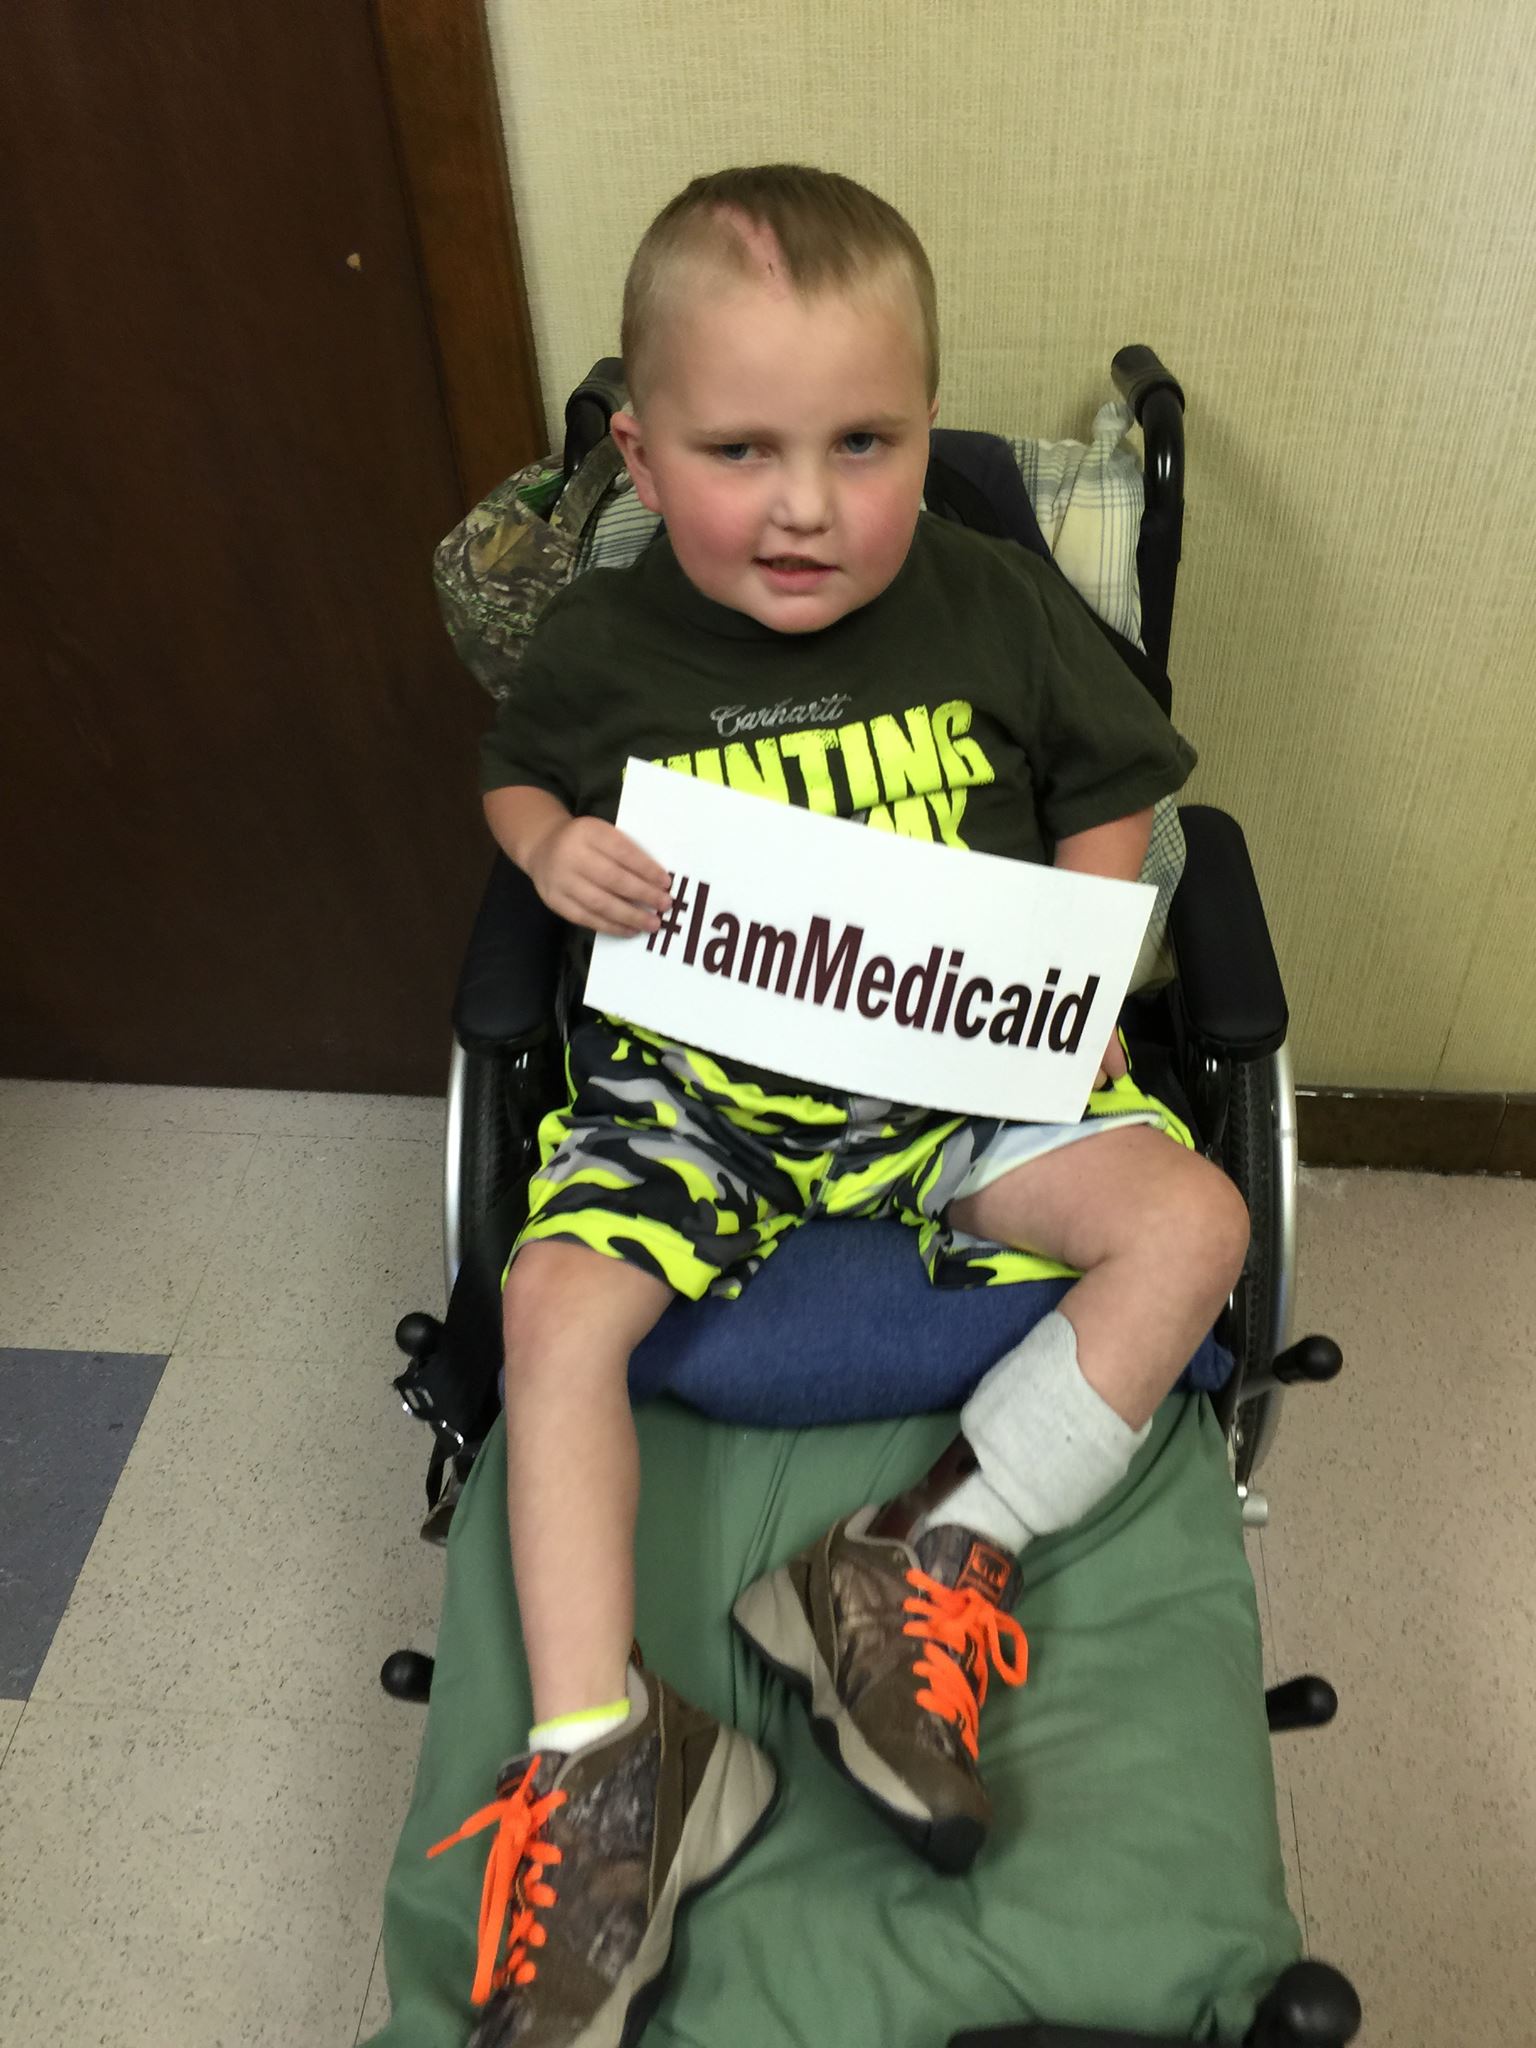  I have Hirschsprungs Syndrome, short-gut and am recovering from brain surgery after having a CNS infection. I am doing great now thanks to Medicaid!&nbsp;‪#‎IamMedicaid  